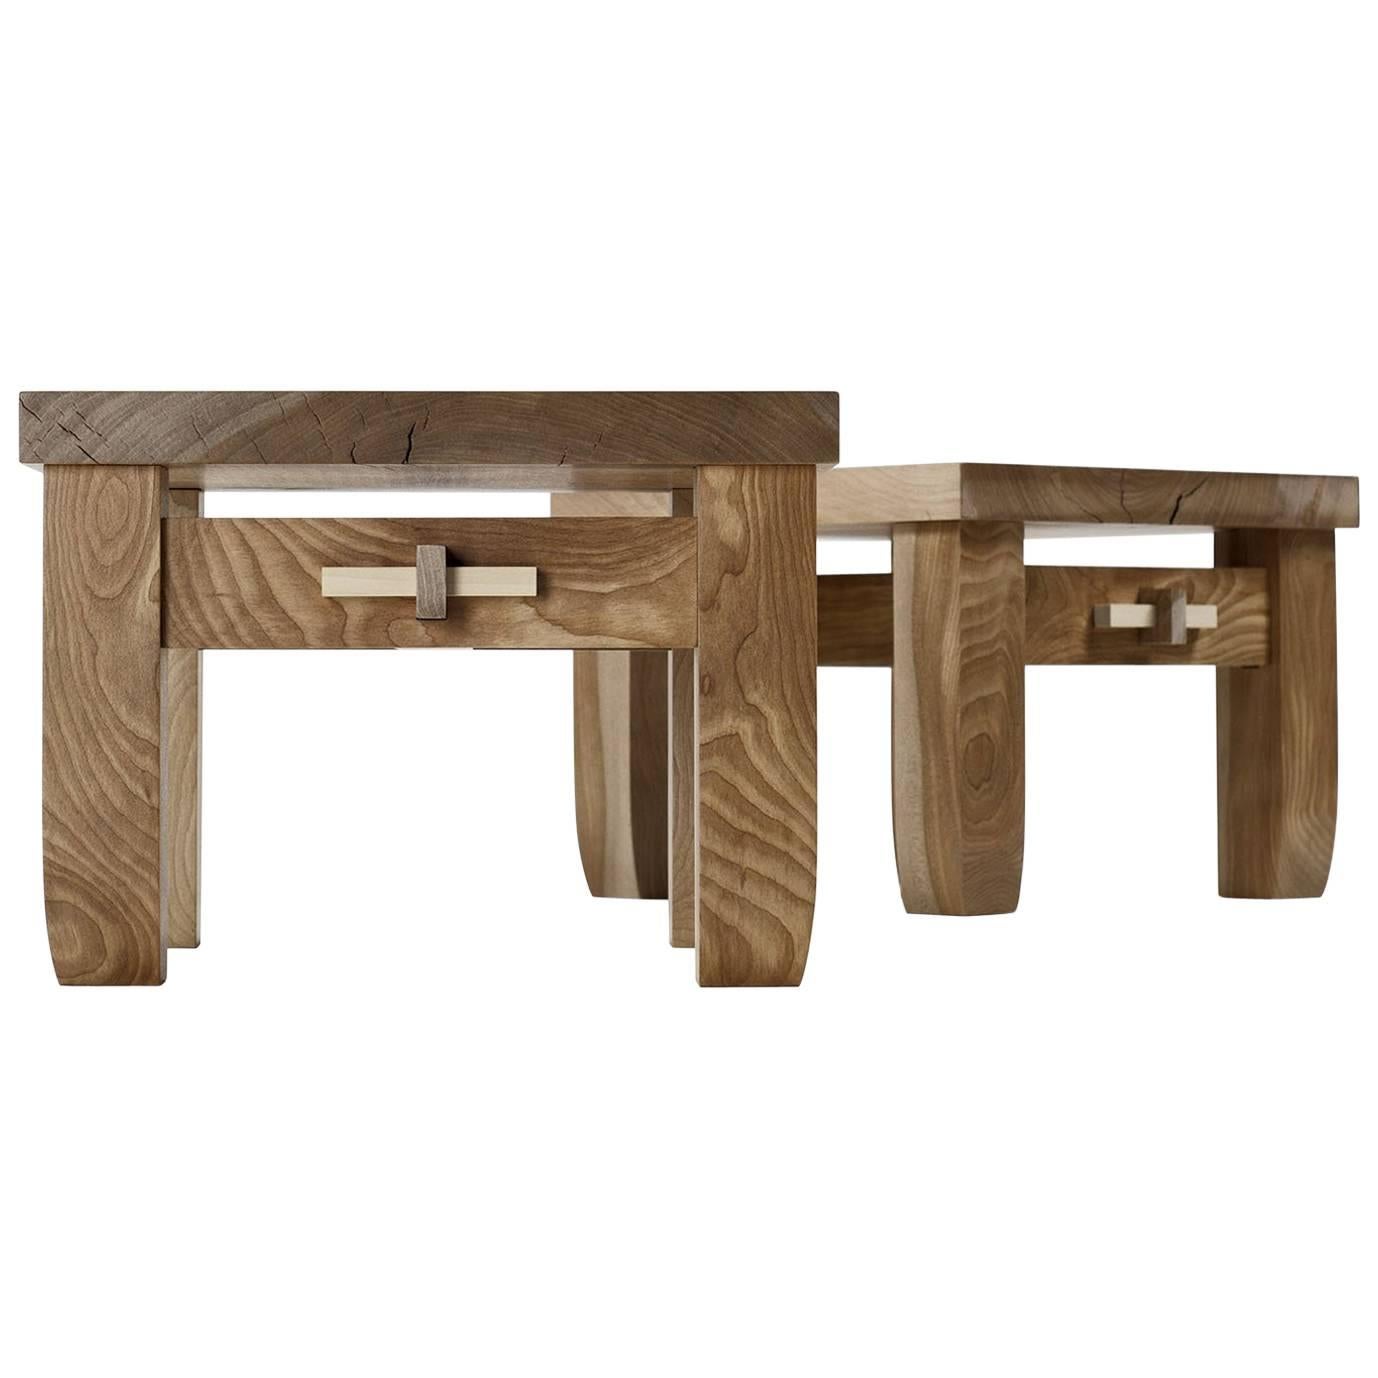 Contemporary Black Birch Hardwood Low Prayer Stool Set Made in Brooklyn in Stock For Sale